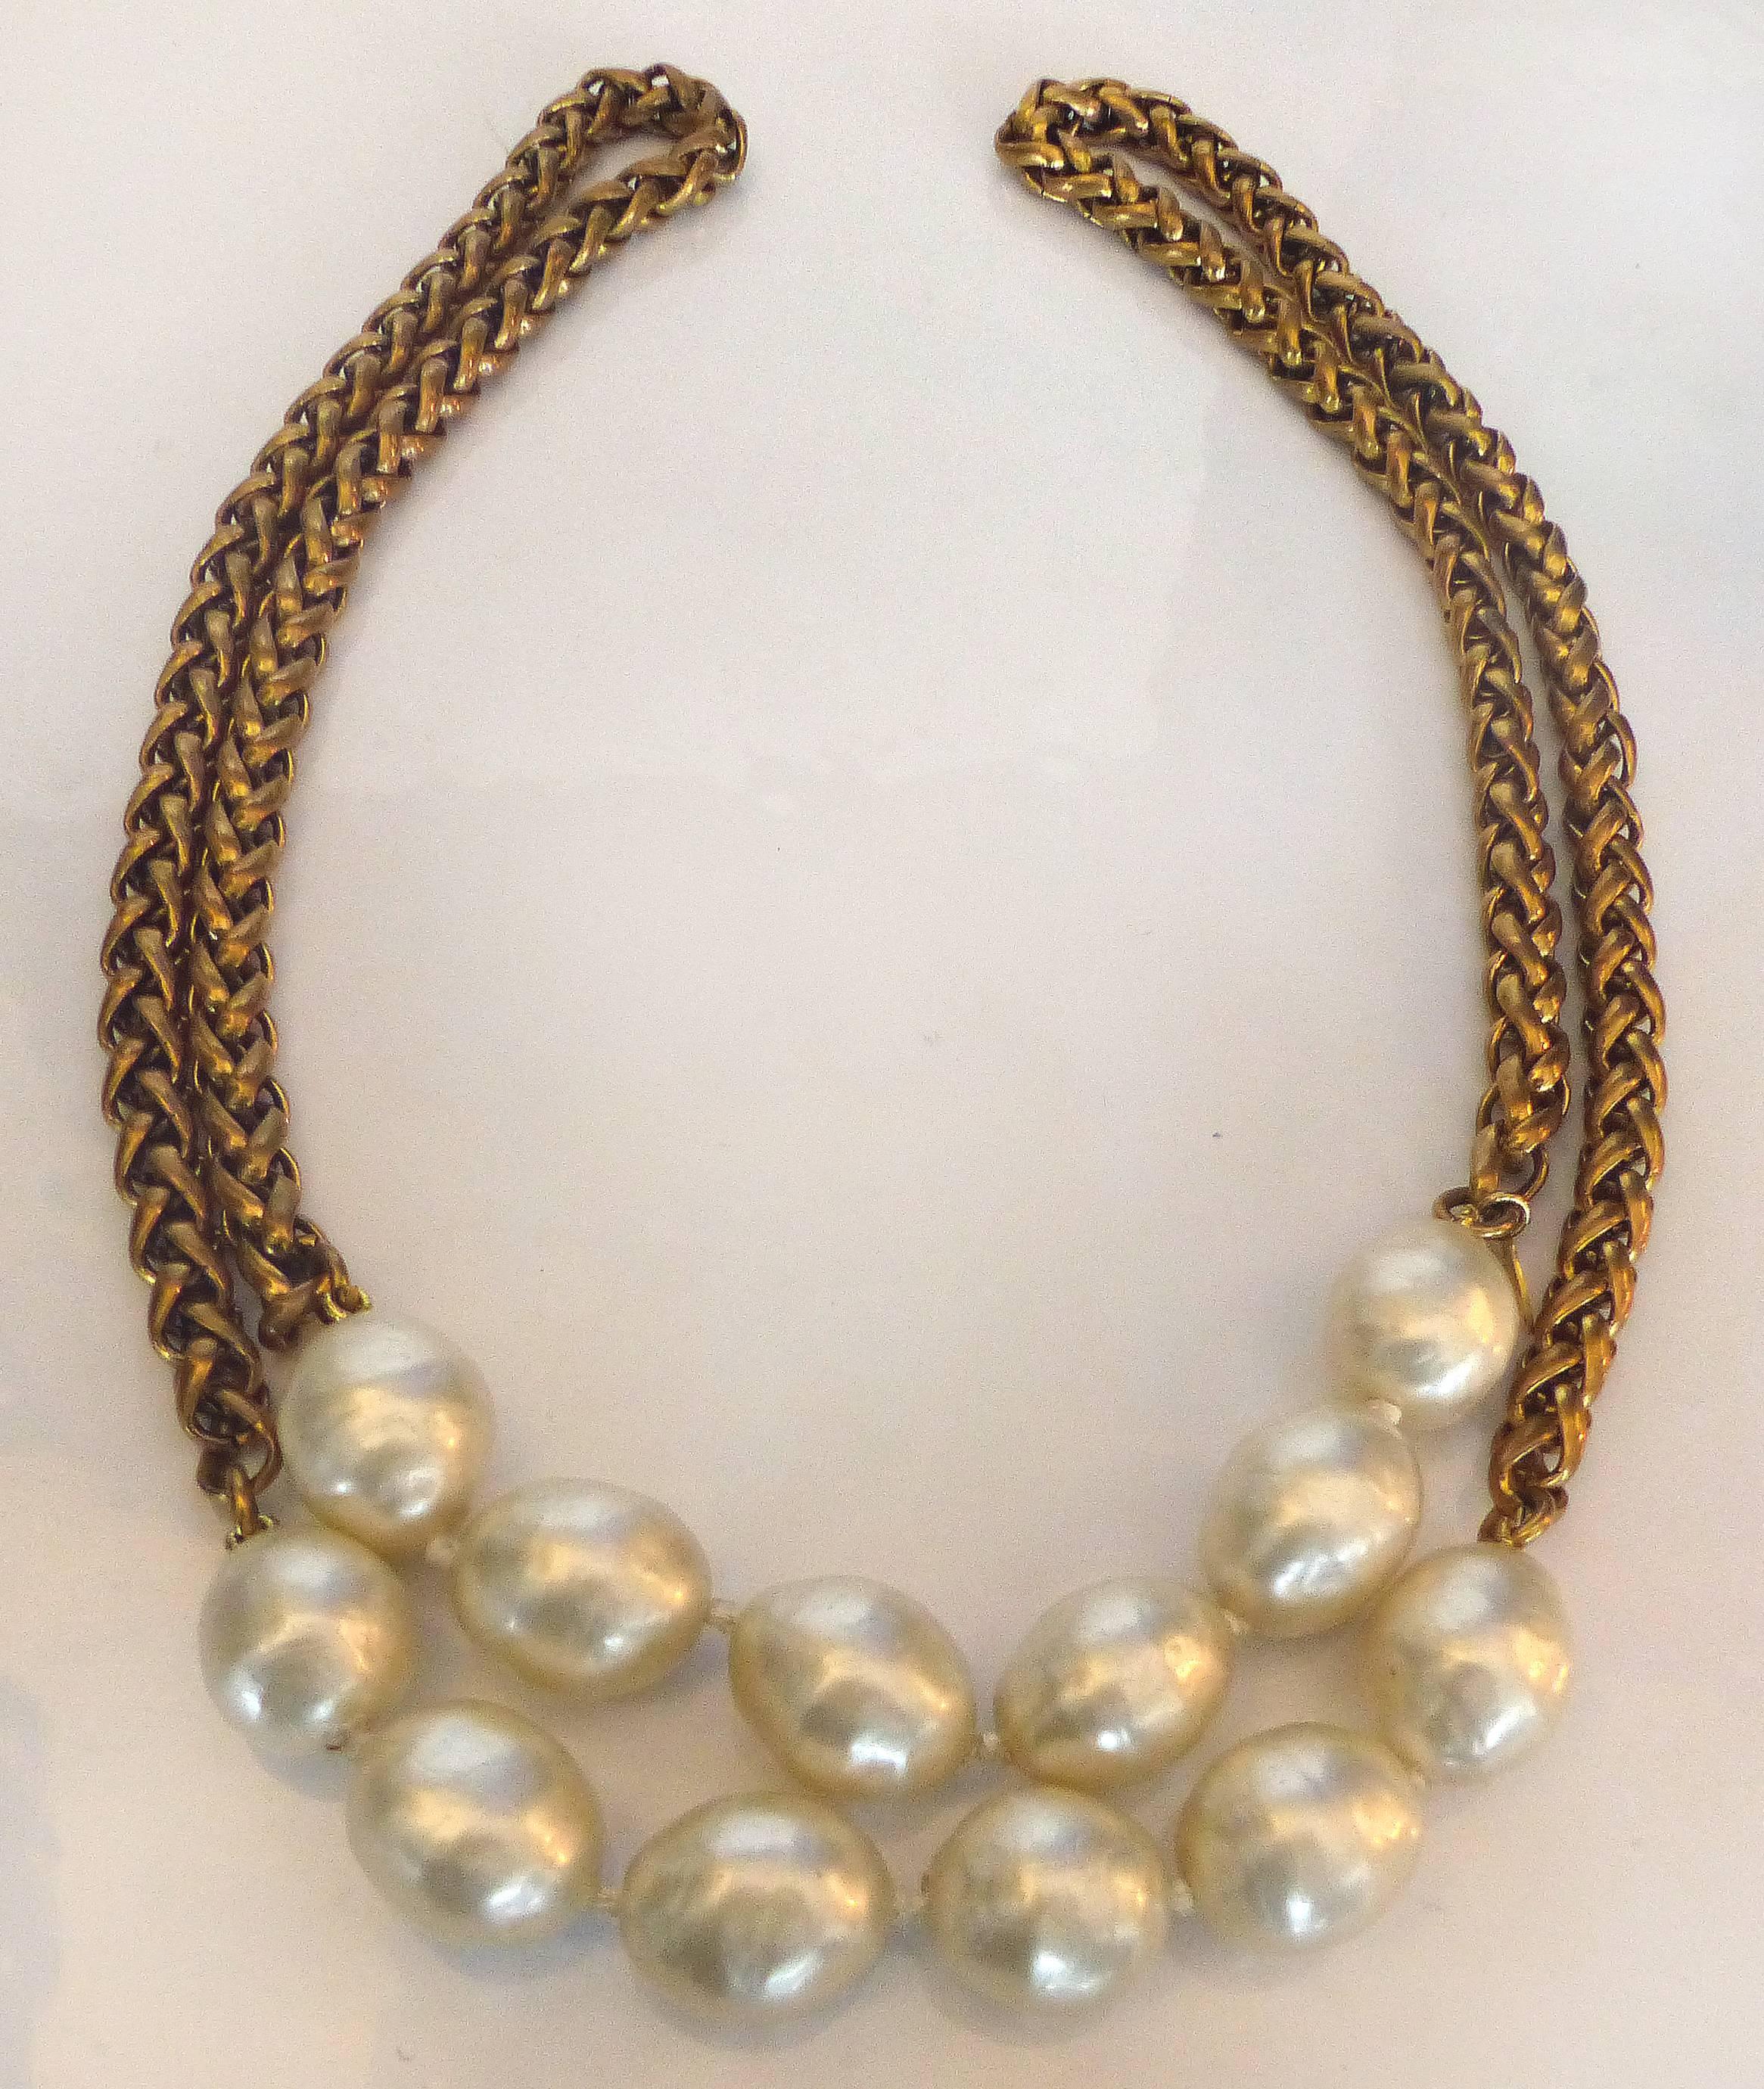 French Vintage Chanel Gold-Tone Necklace with Faux Pearls, 1984